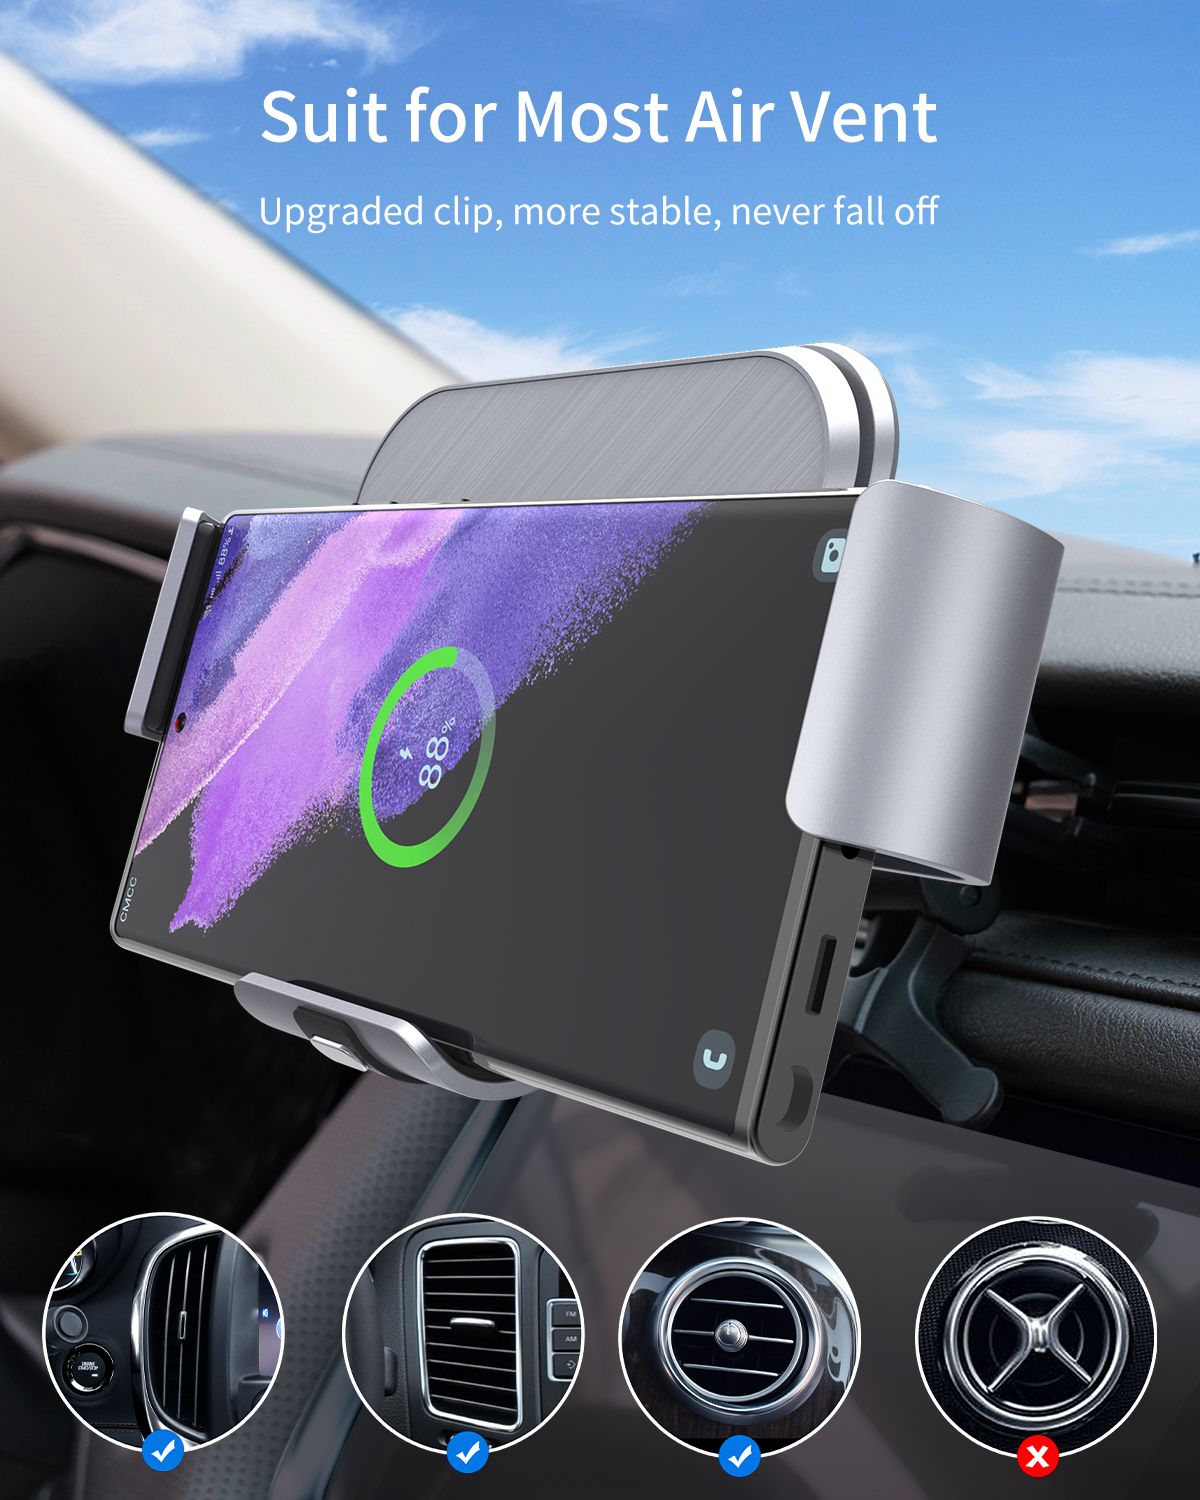 Car Dual Coil Wireless Charger For Samsung Galaxy Devices - Caubade